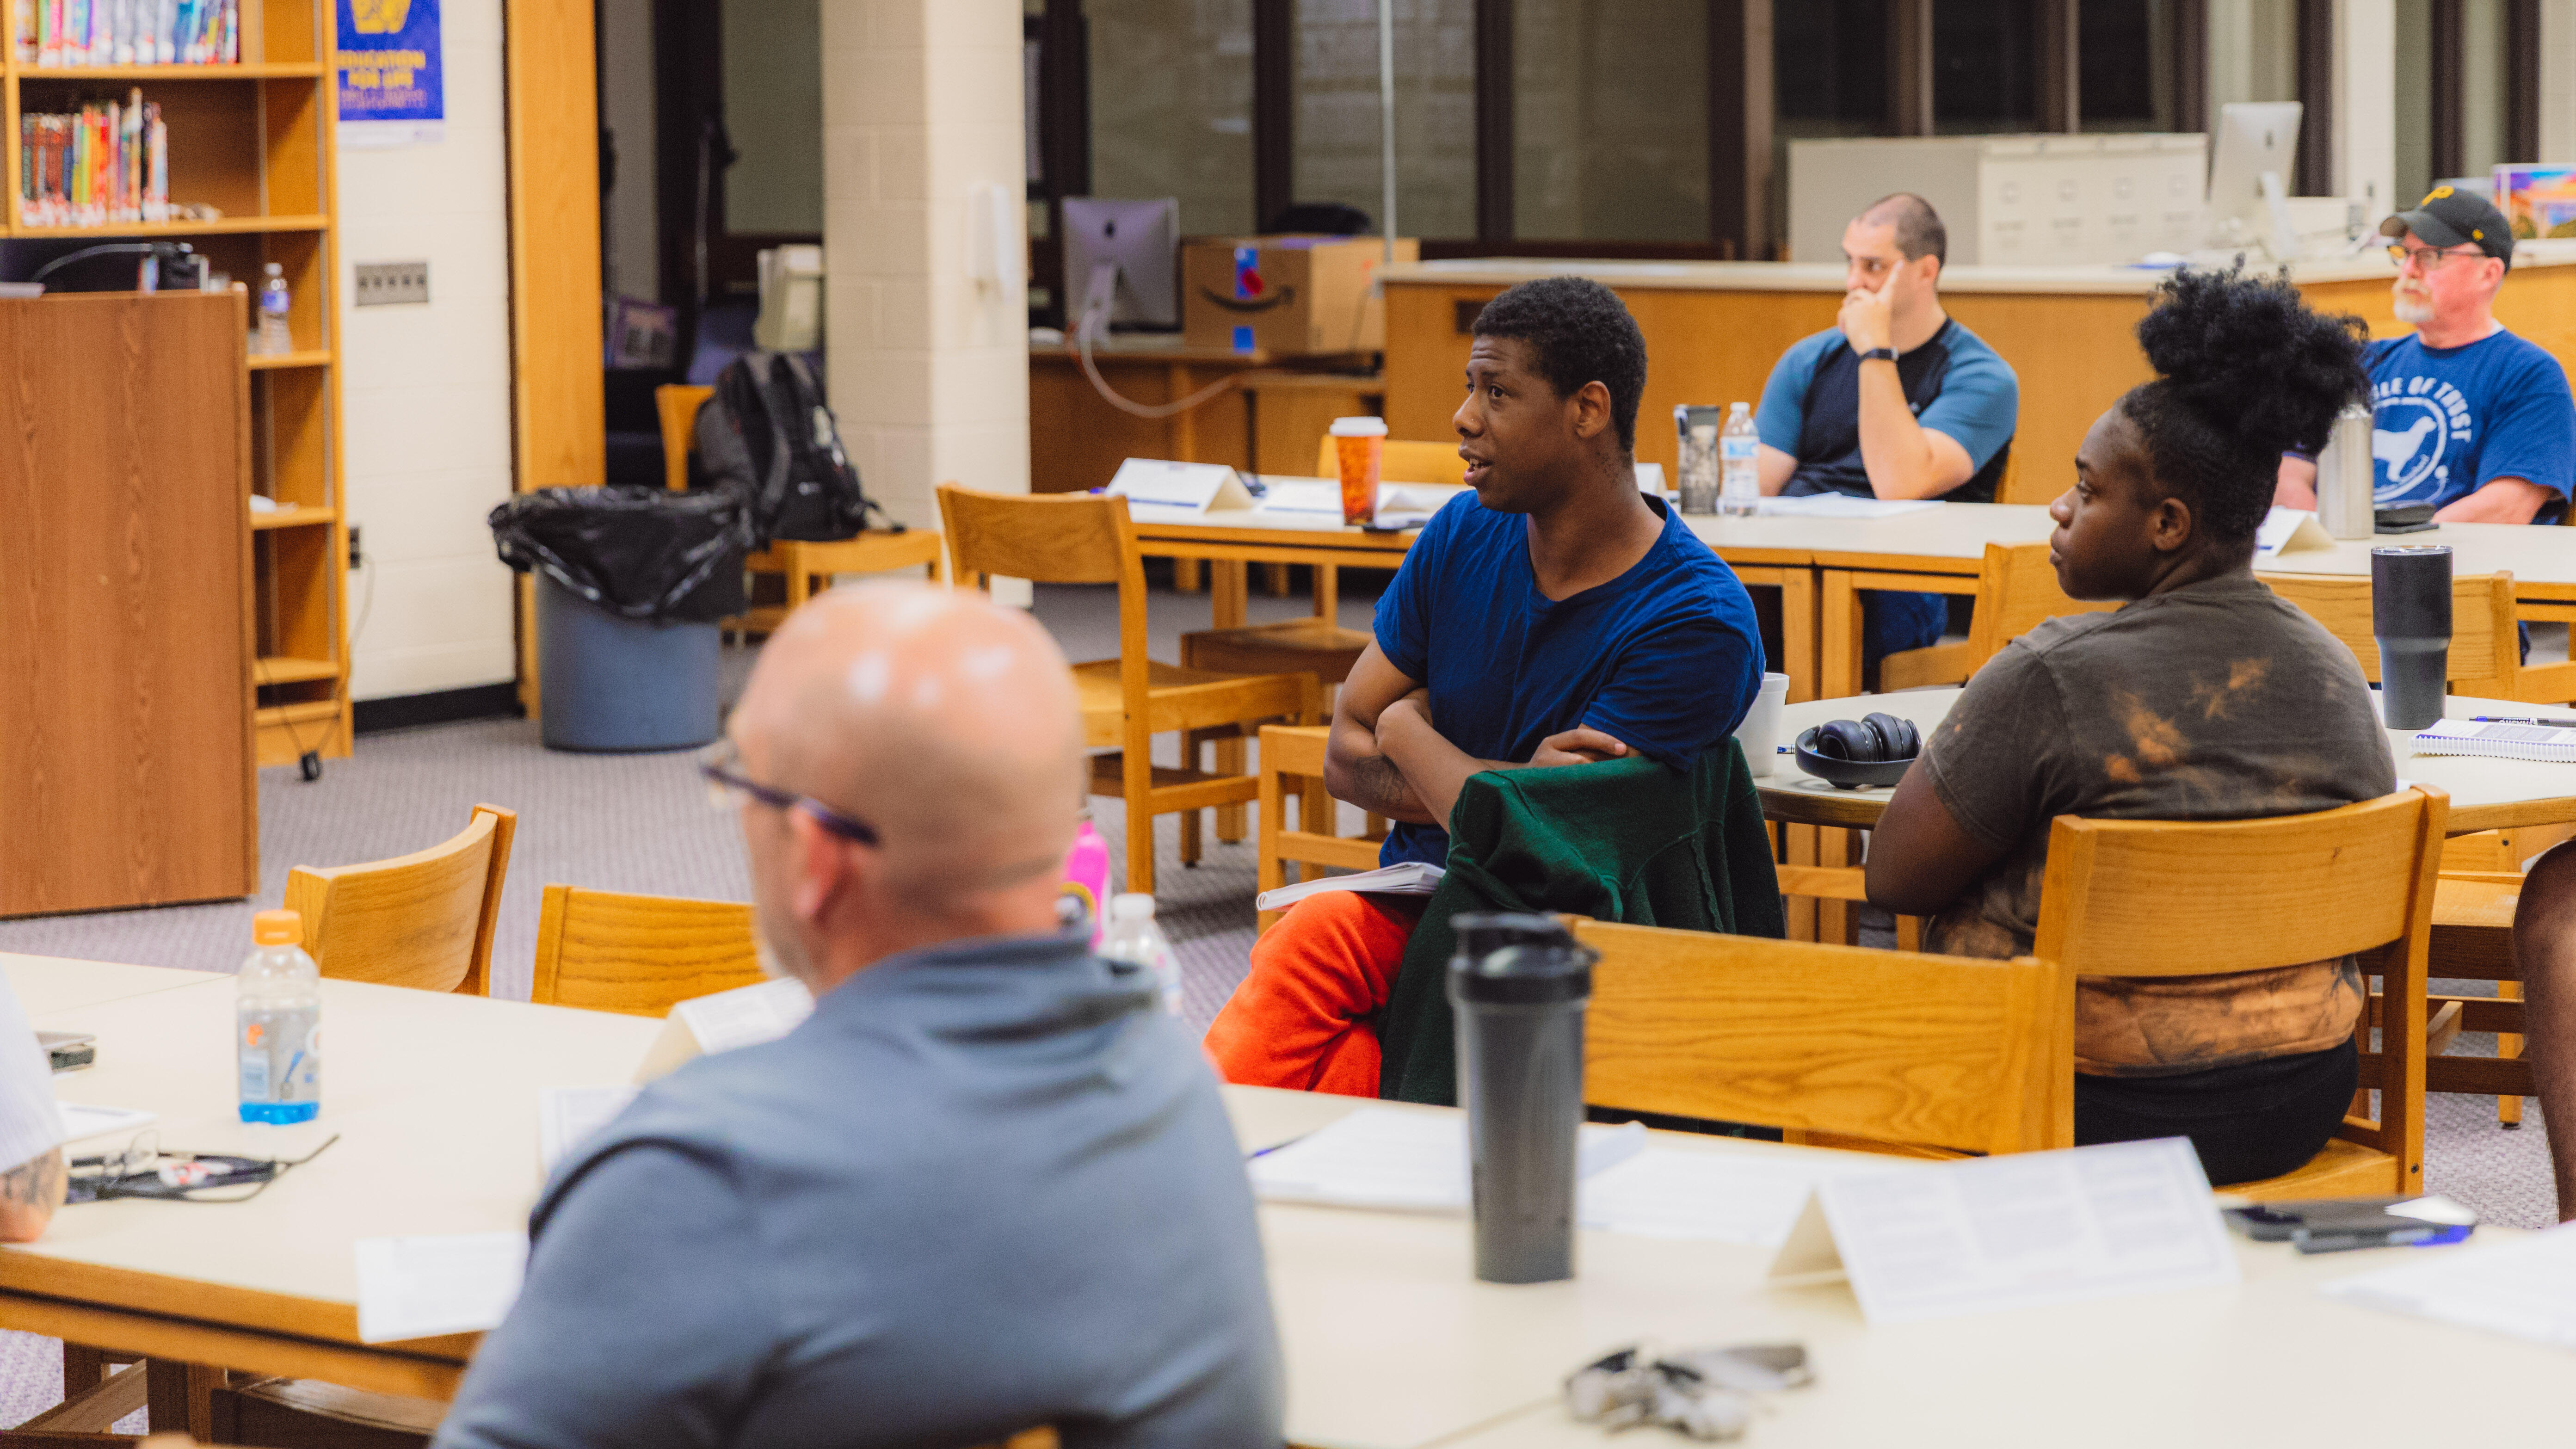 A student in a school resource officer training seminar asks a question while seated at a table